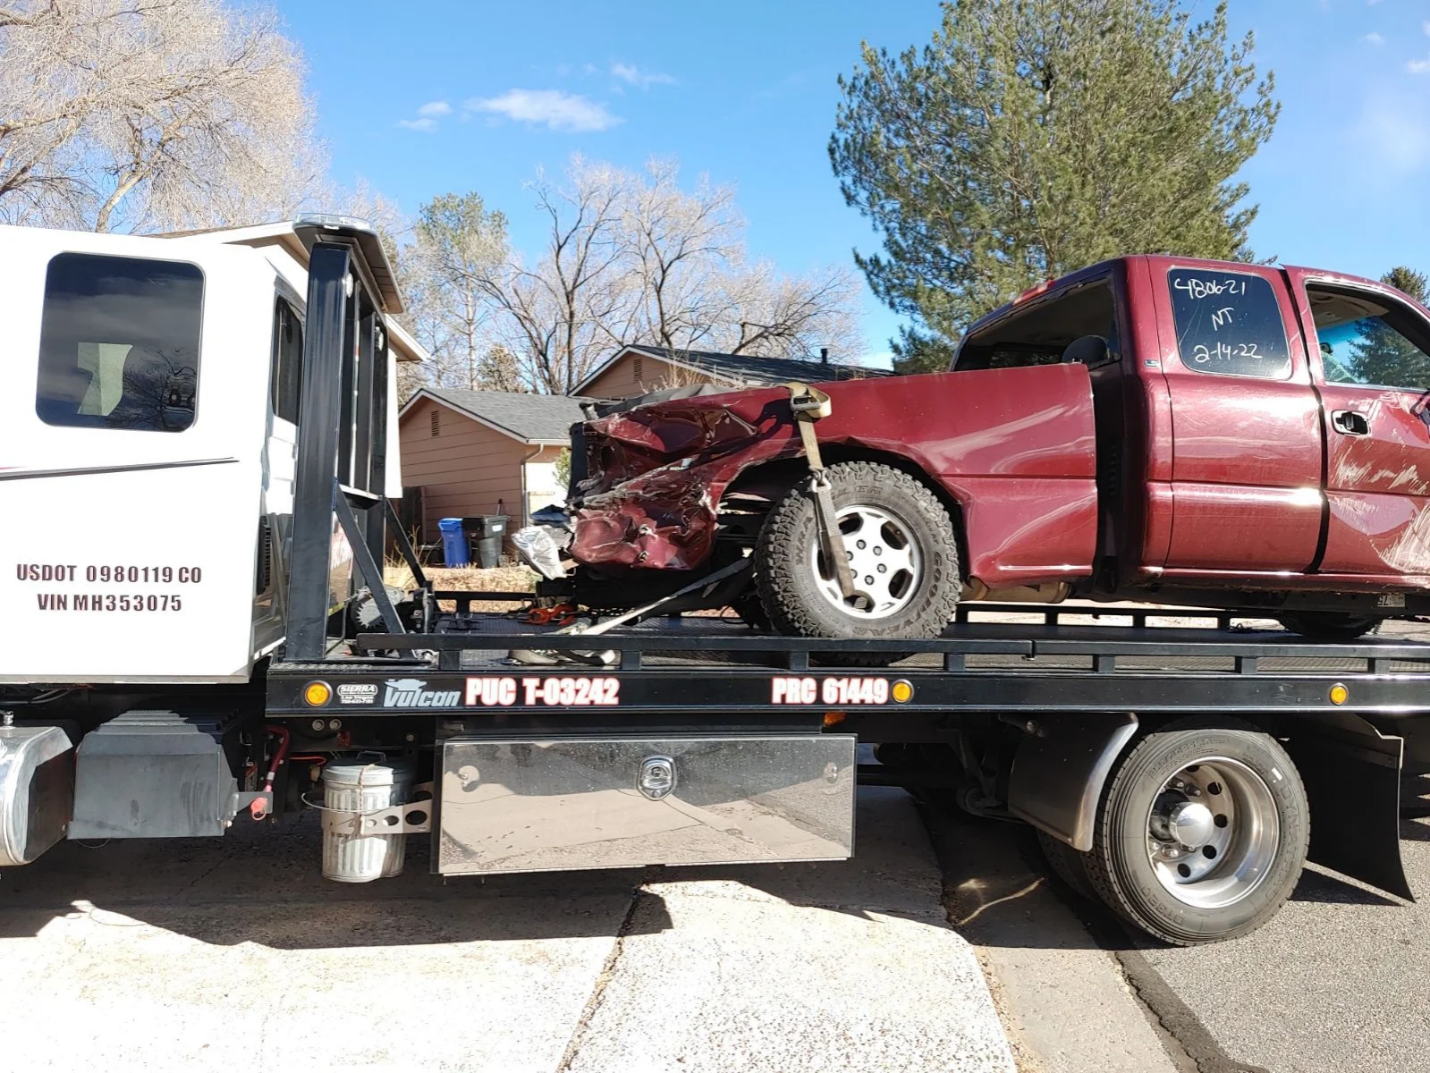 A Red Damaged Car on a Tow Truck